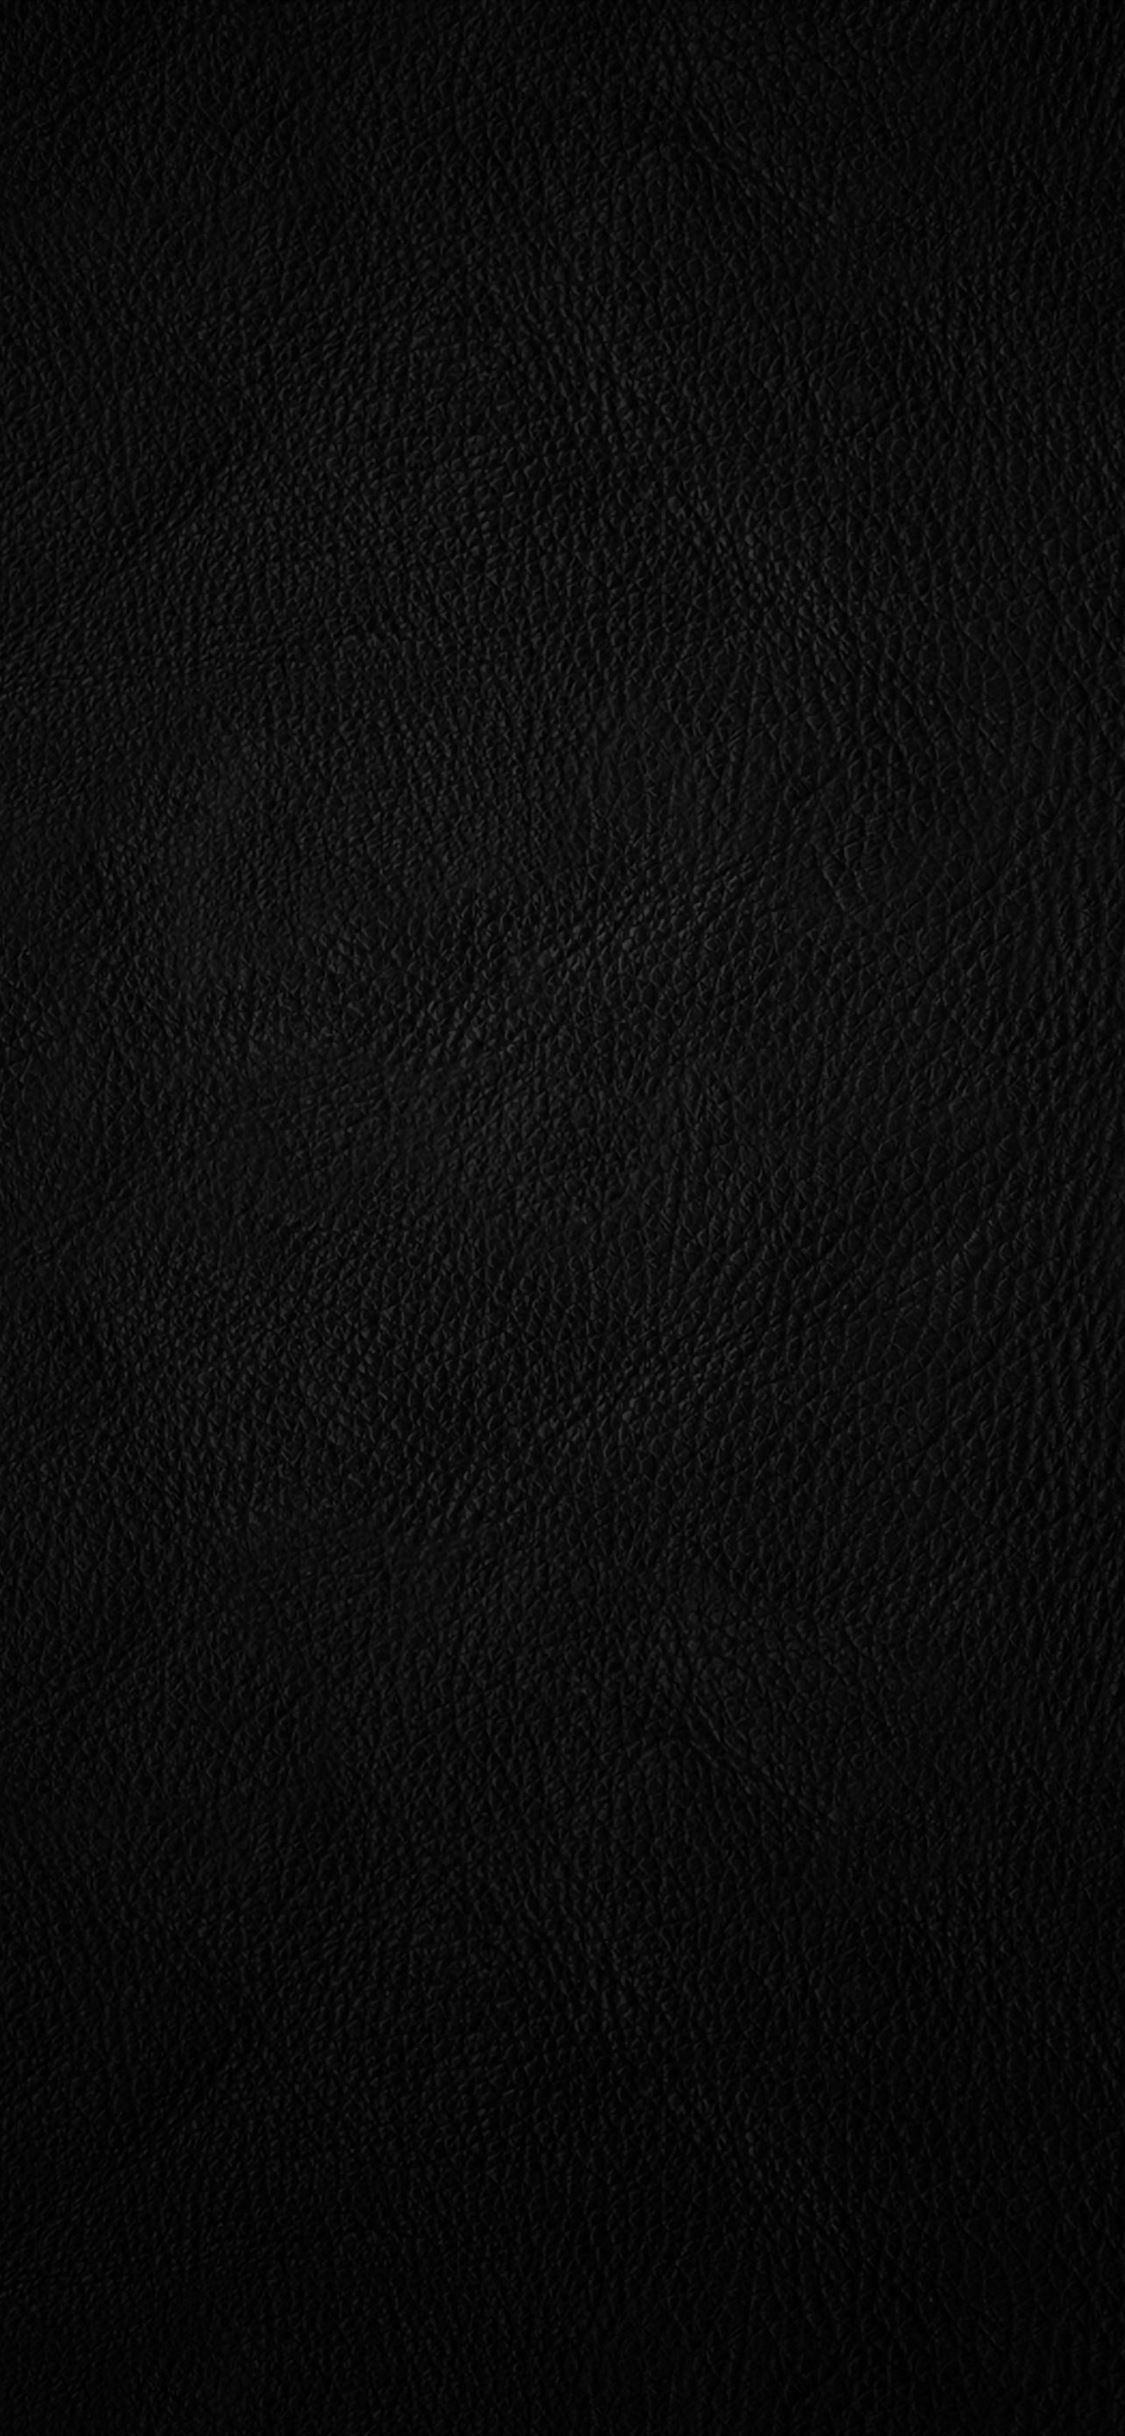 Download wallpaper 1920x1080 leather texture surface full hd hdtv fhd  1080p hd background